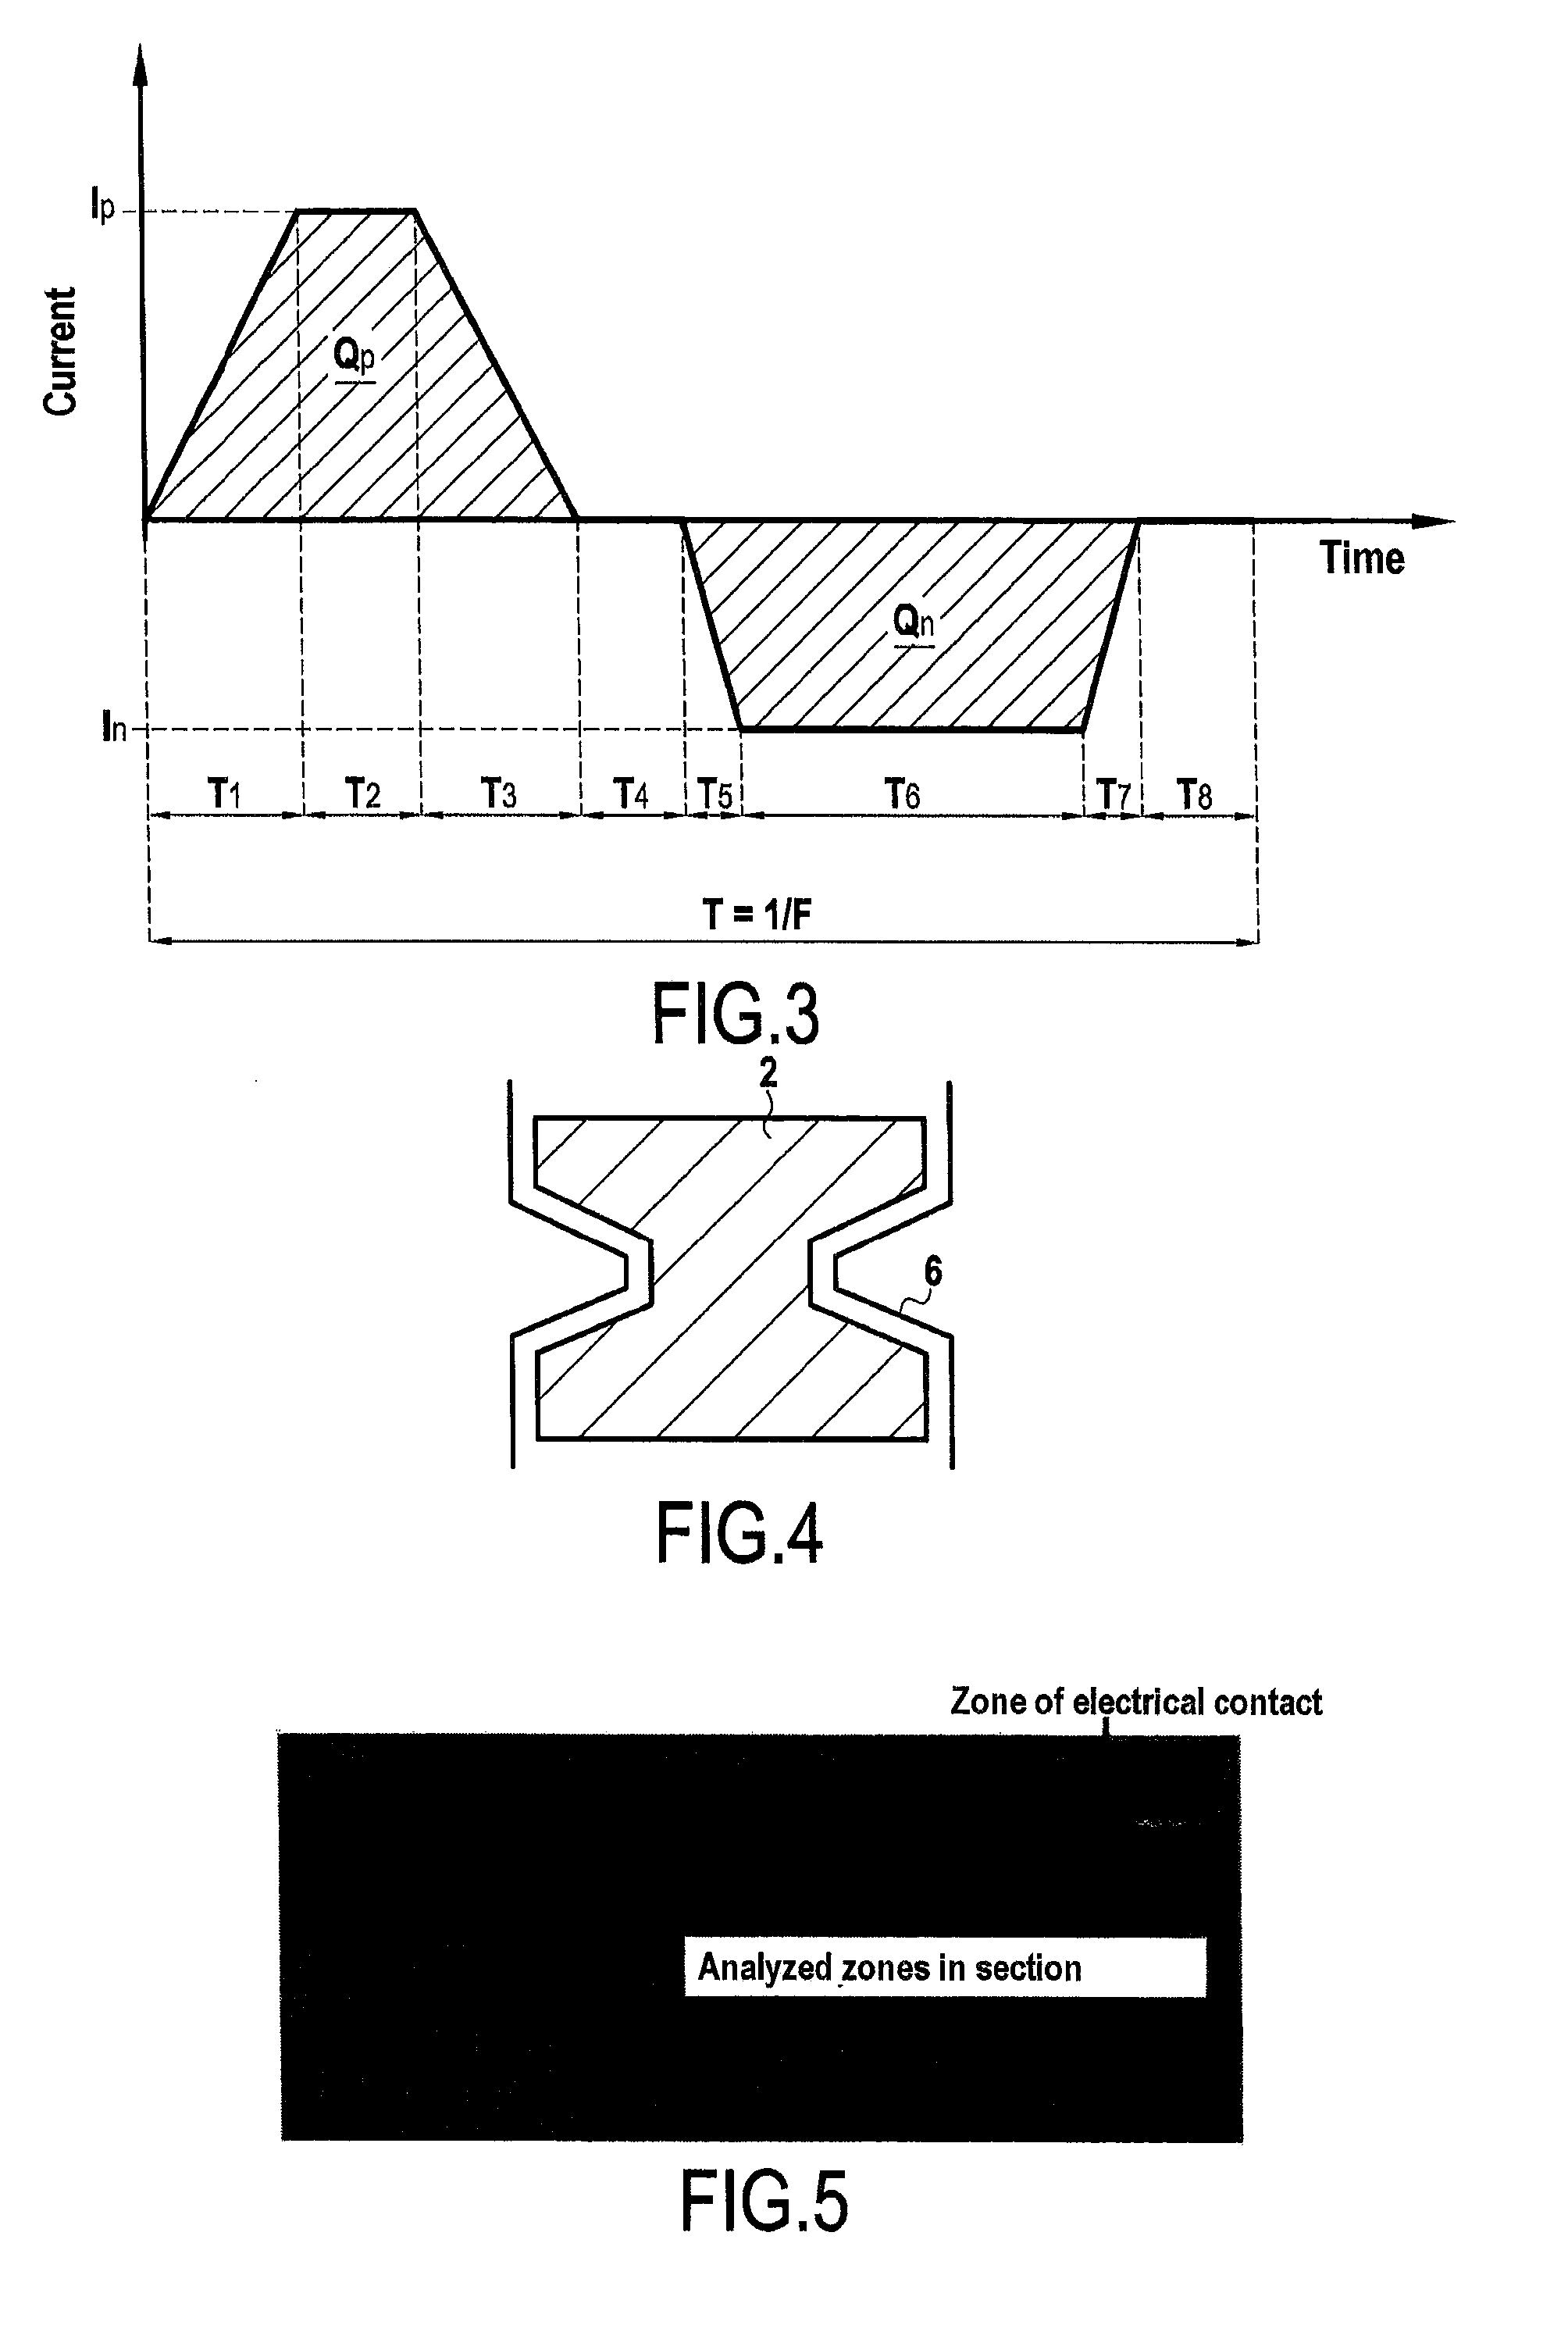 Method for manufacturing a part coated with a protective coating